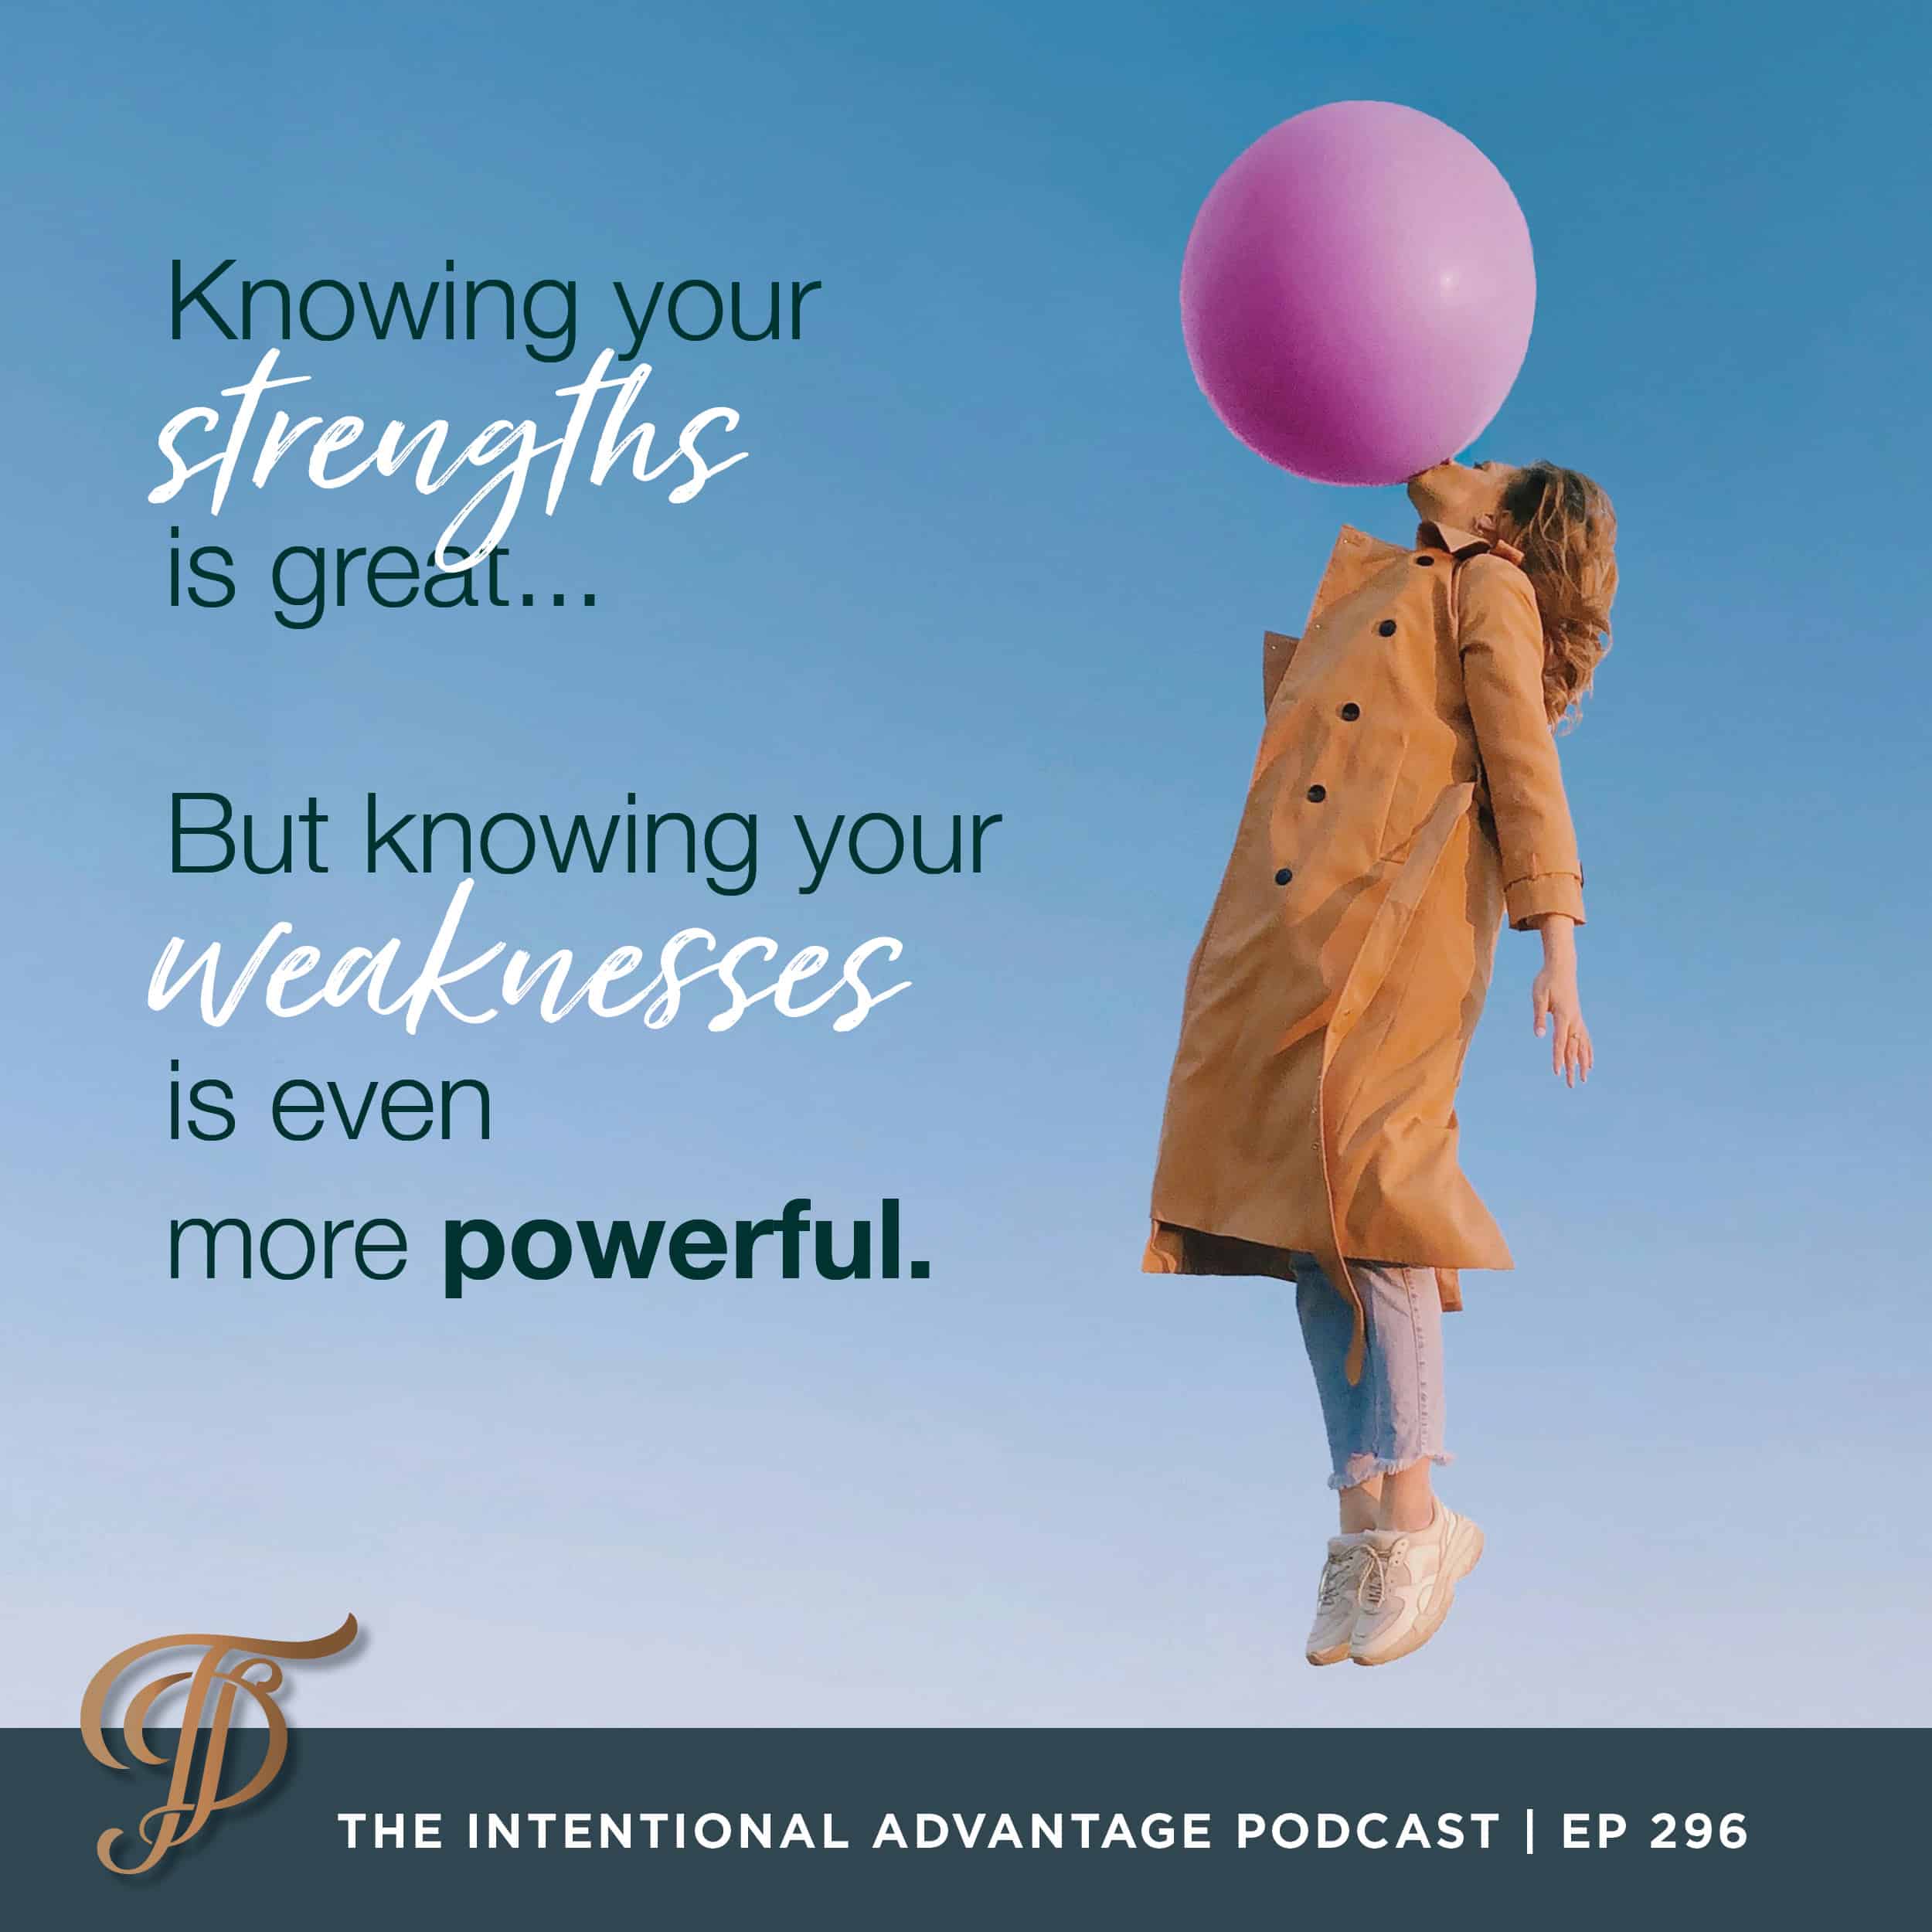 Intentional Advantage Podcast with Tanya Dalton and John Dalton the power of Knowing your Strengths and knowing your weaknesses